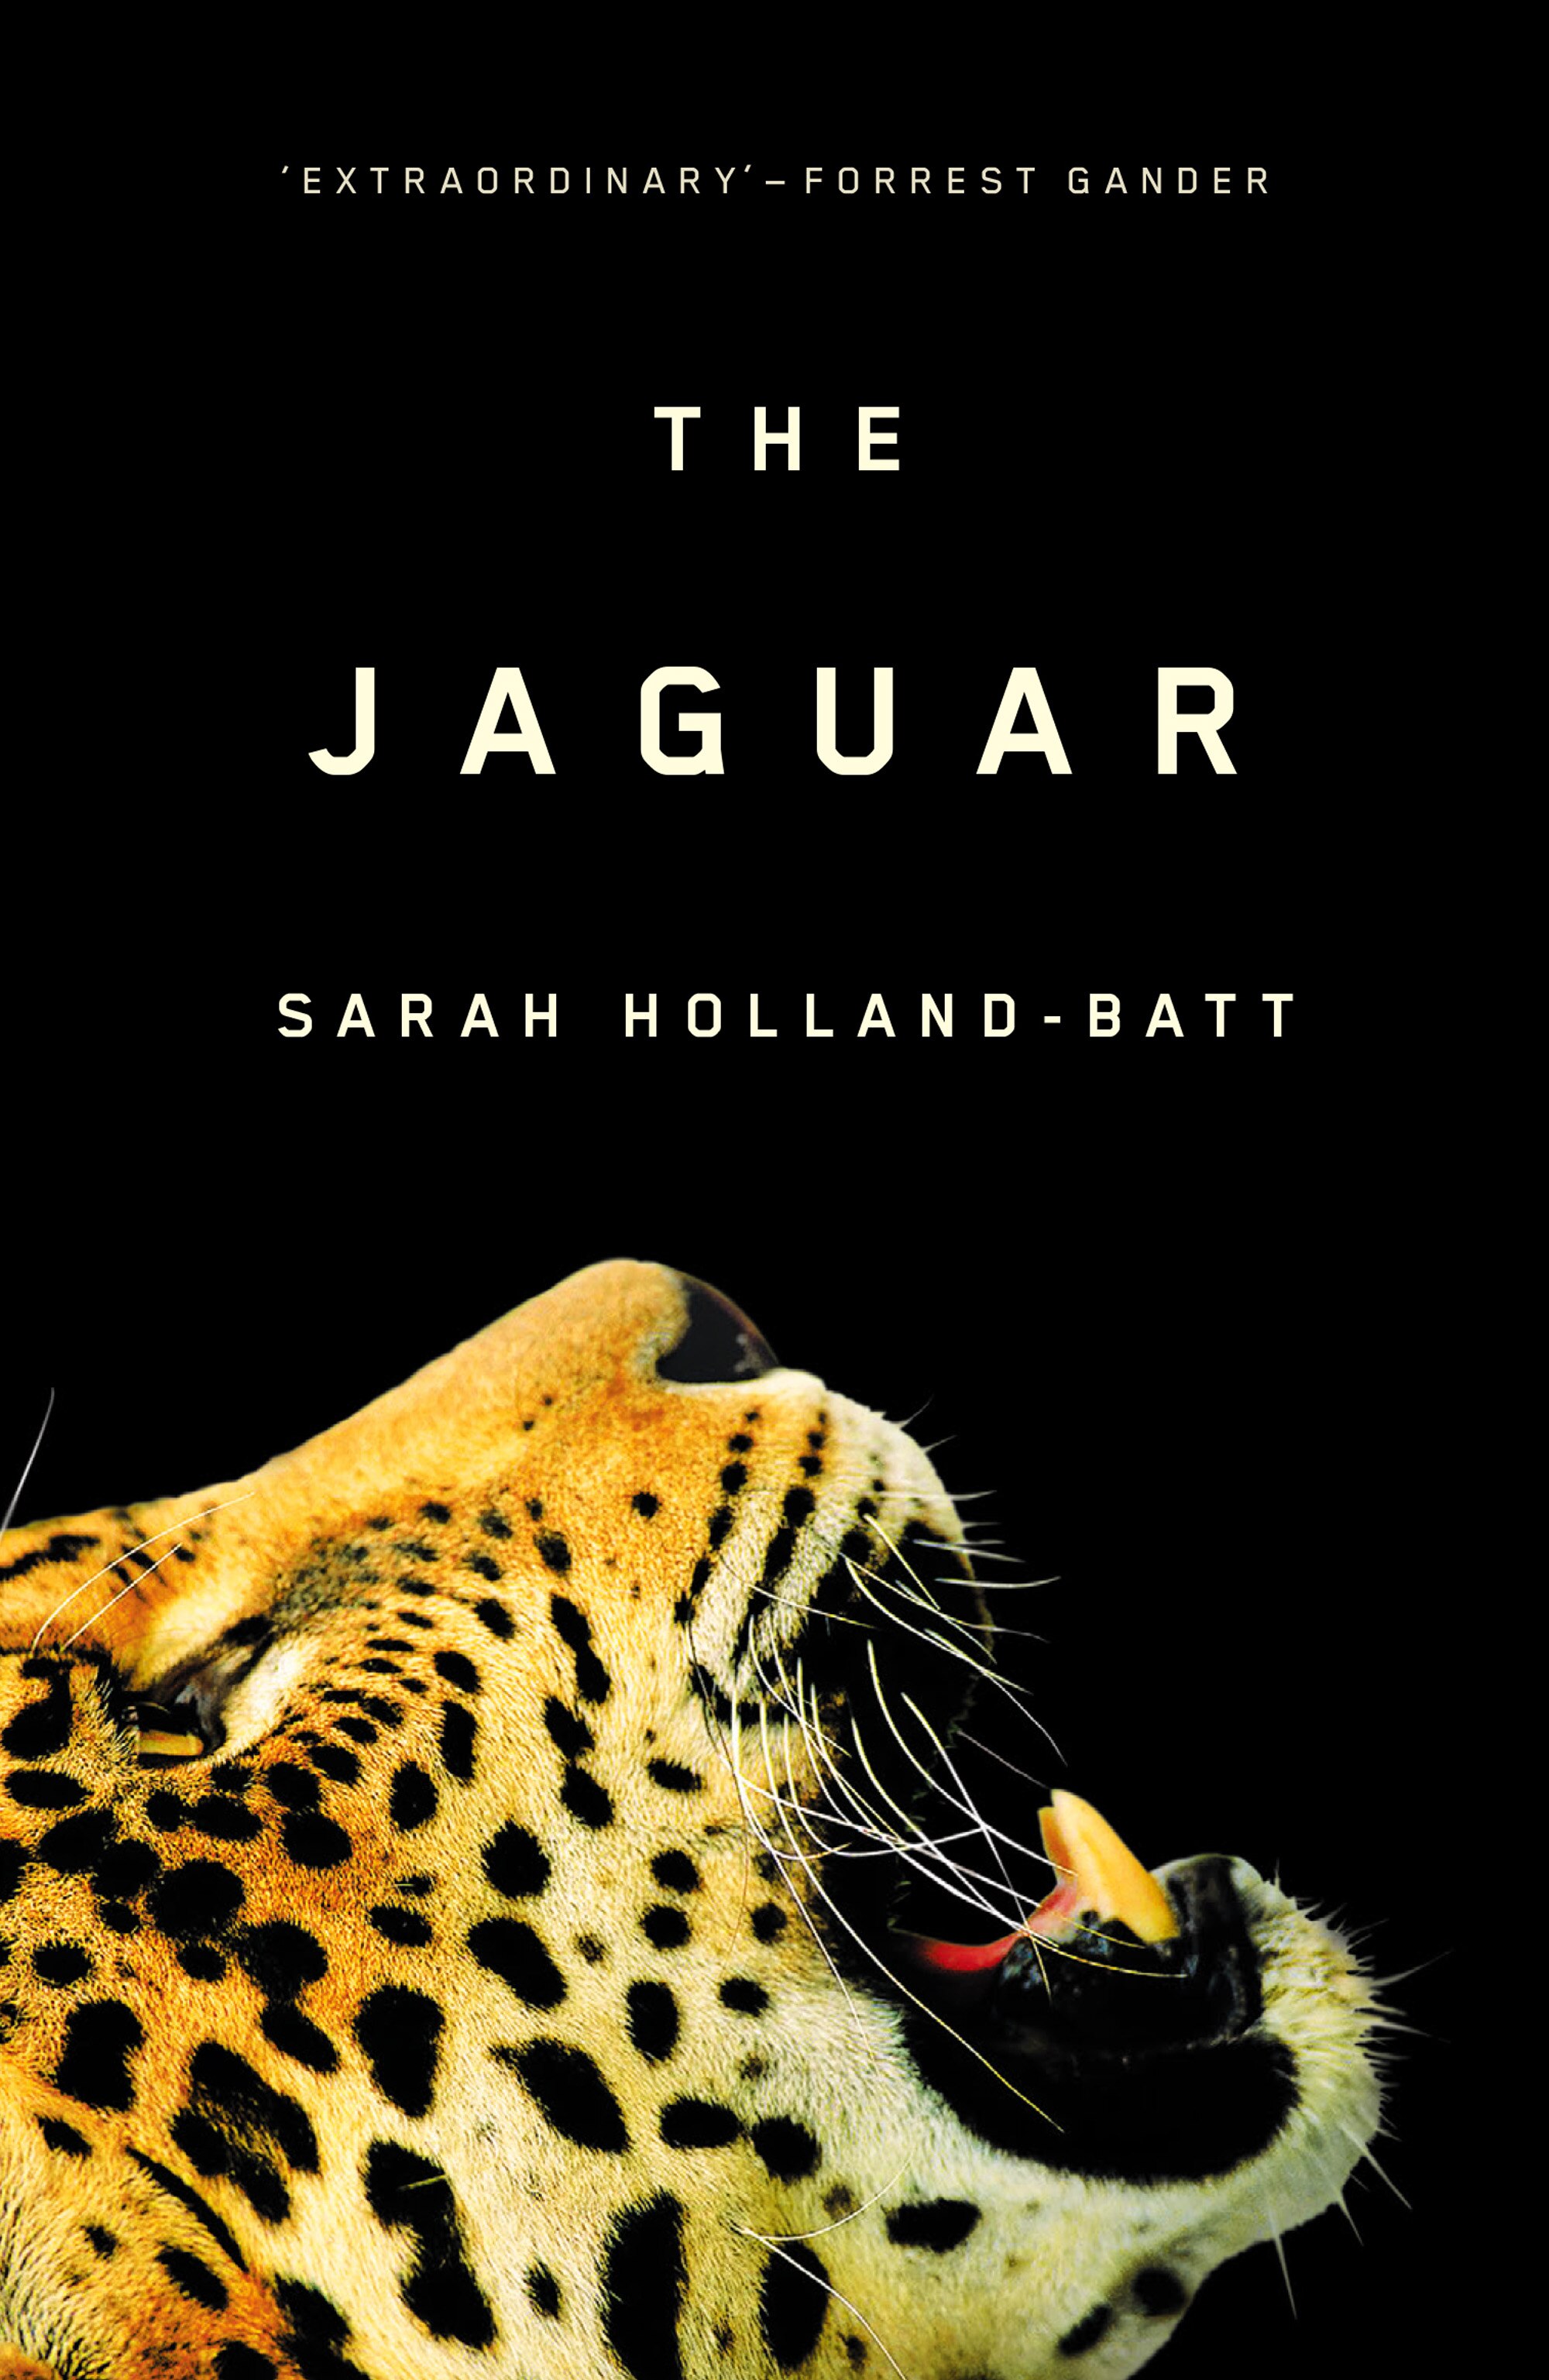 Cover of The Jaguar Sarah Holland-Batt featuring a close-up of a jaguar looking  up against a black background